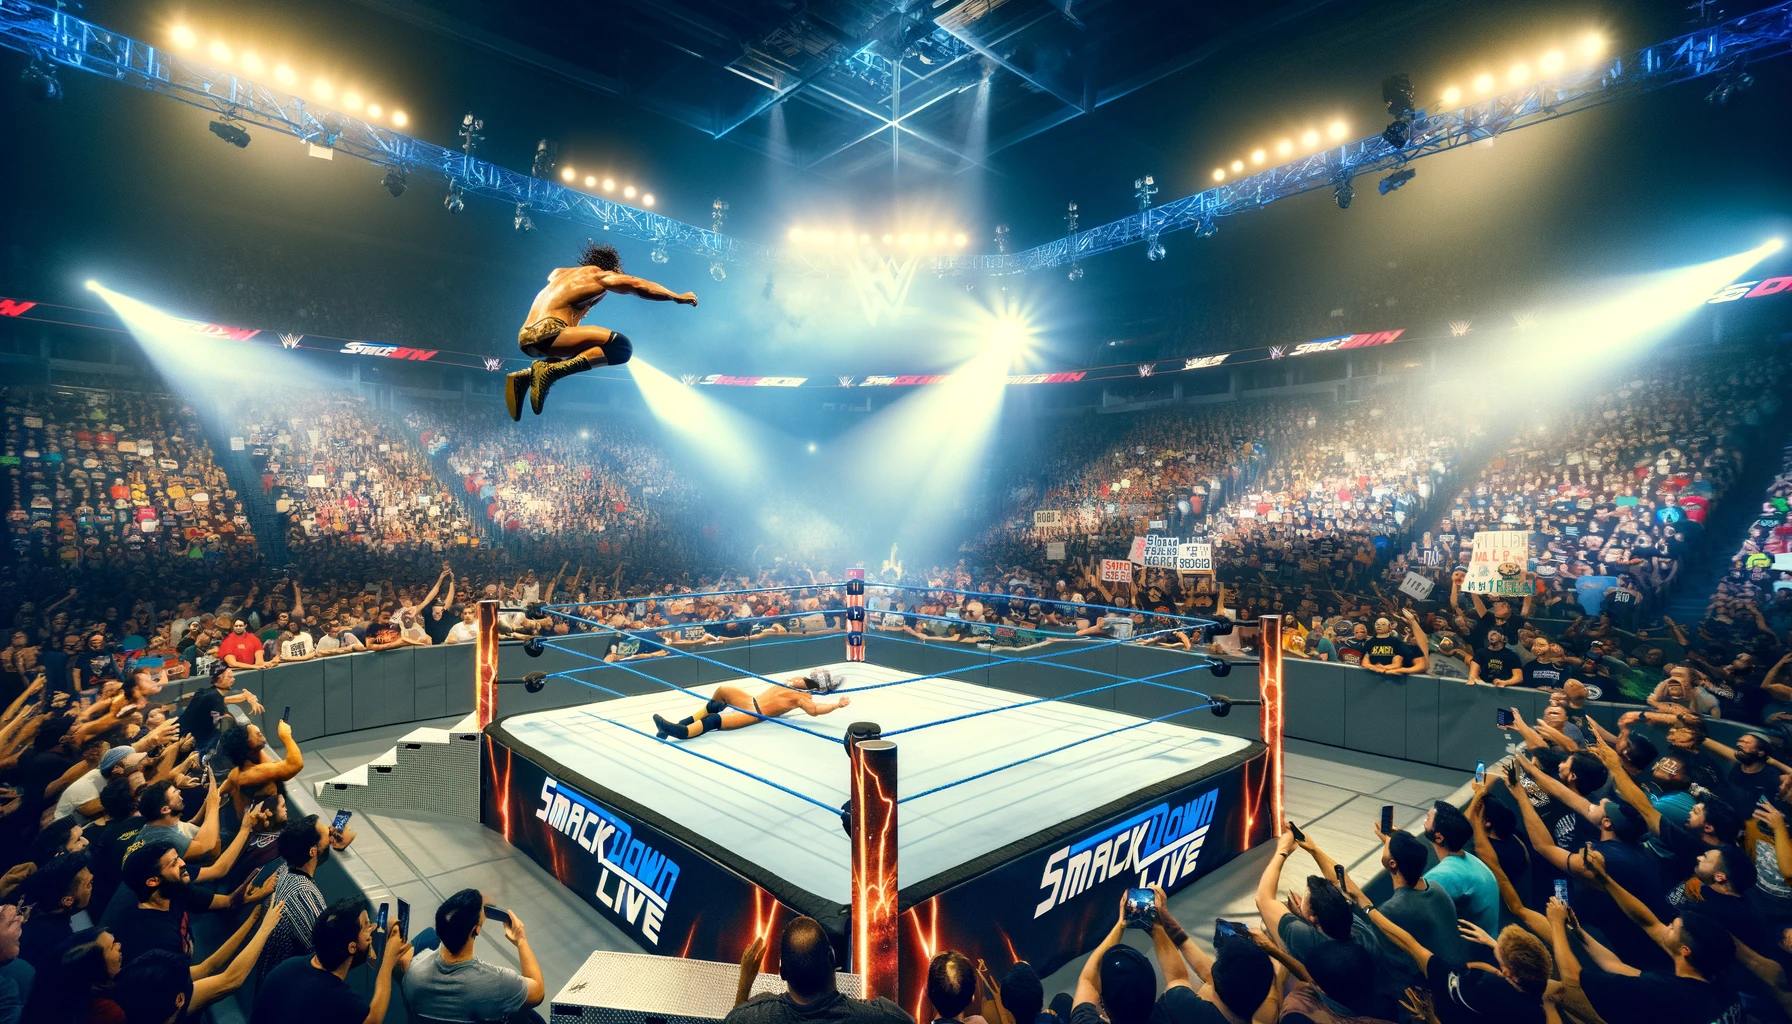 WWE SmackDown Episode 1450: A Thrilling Spectacle That Captivates and Excites